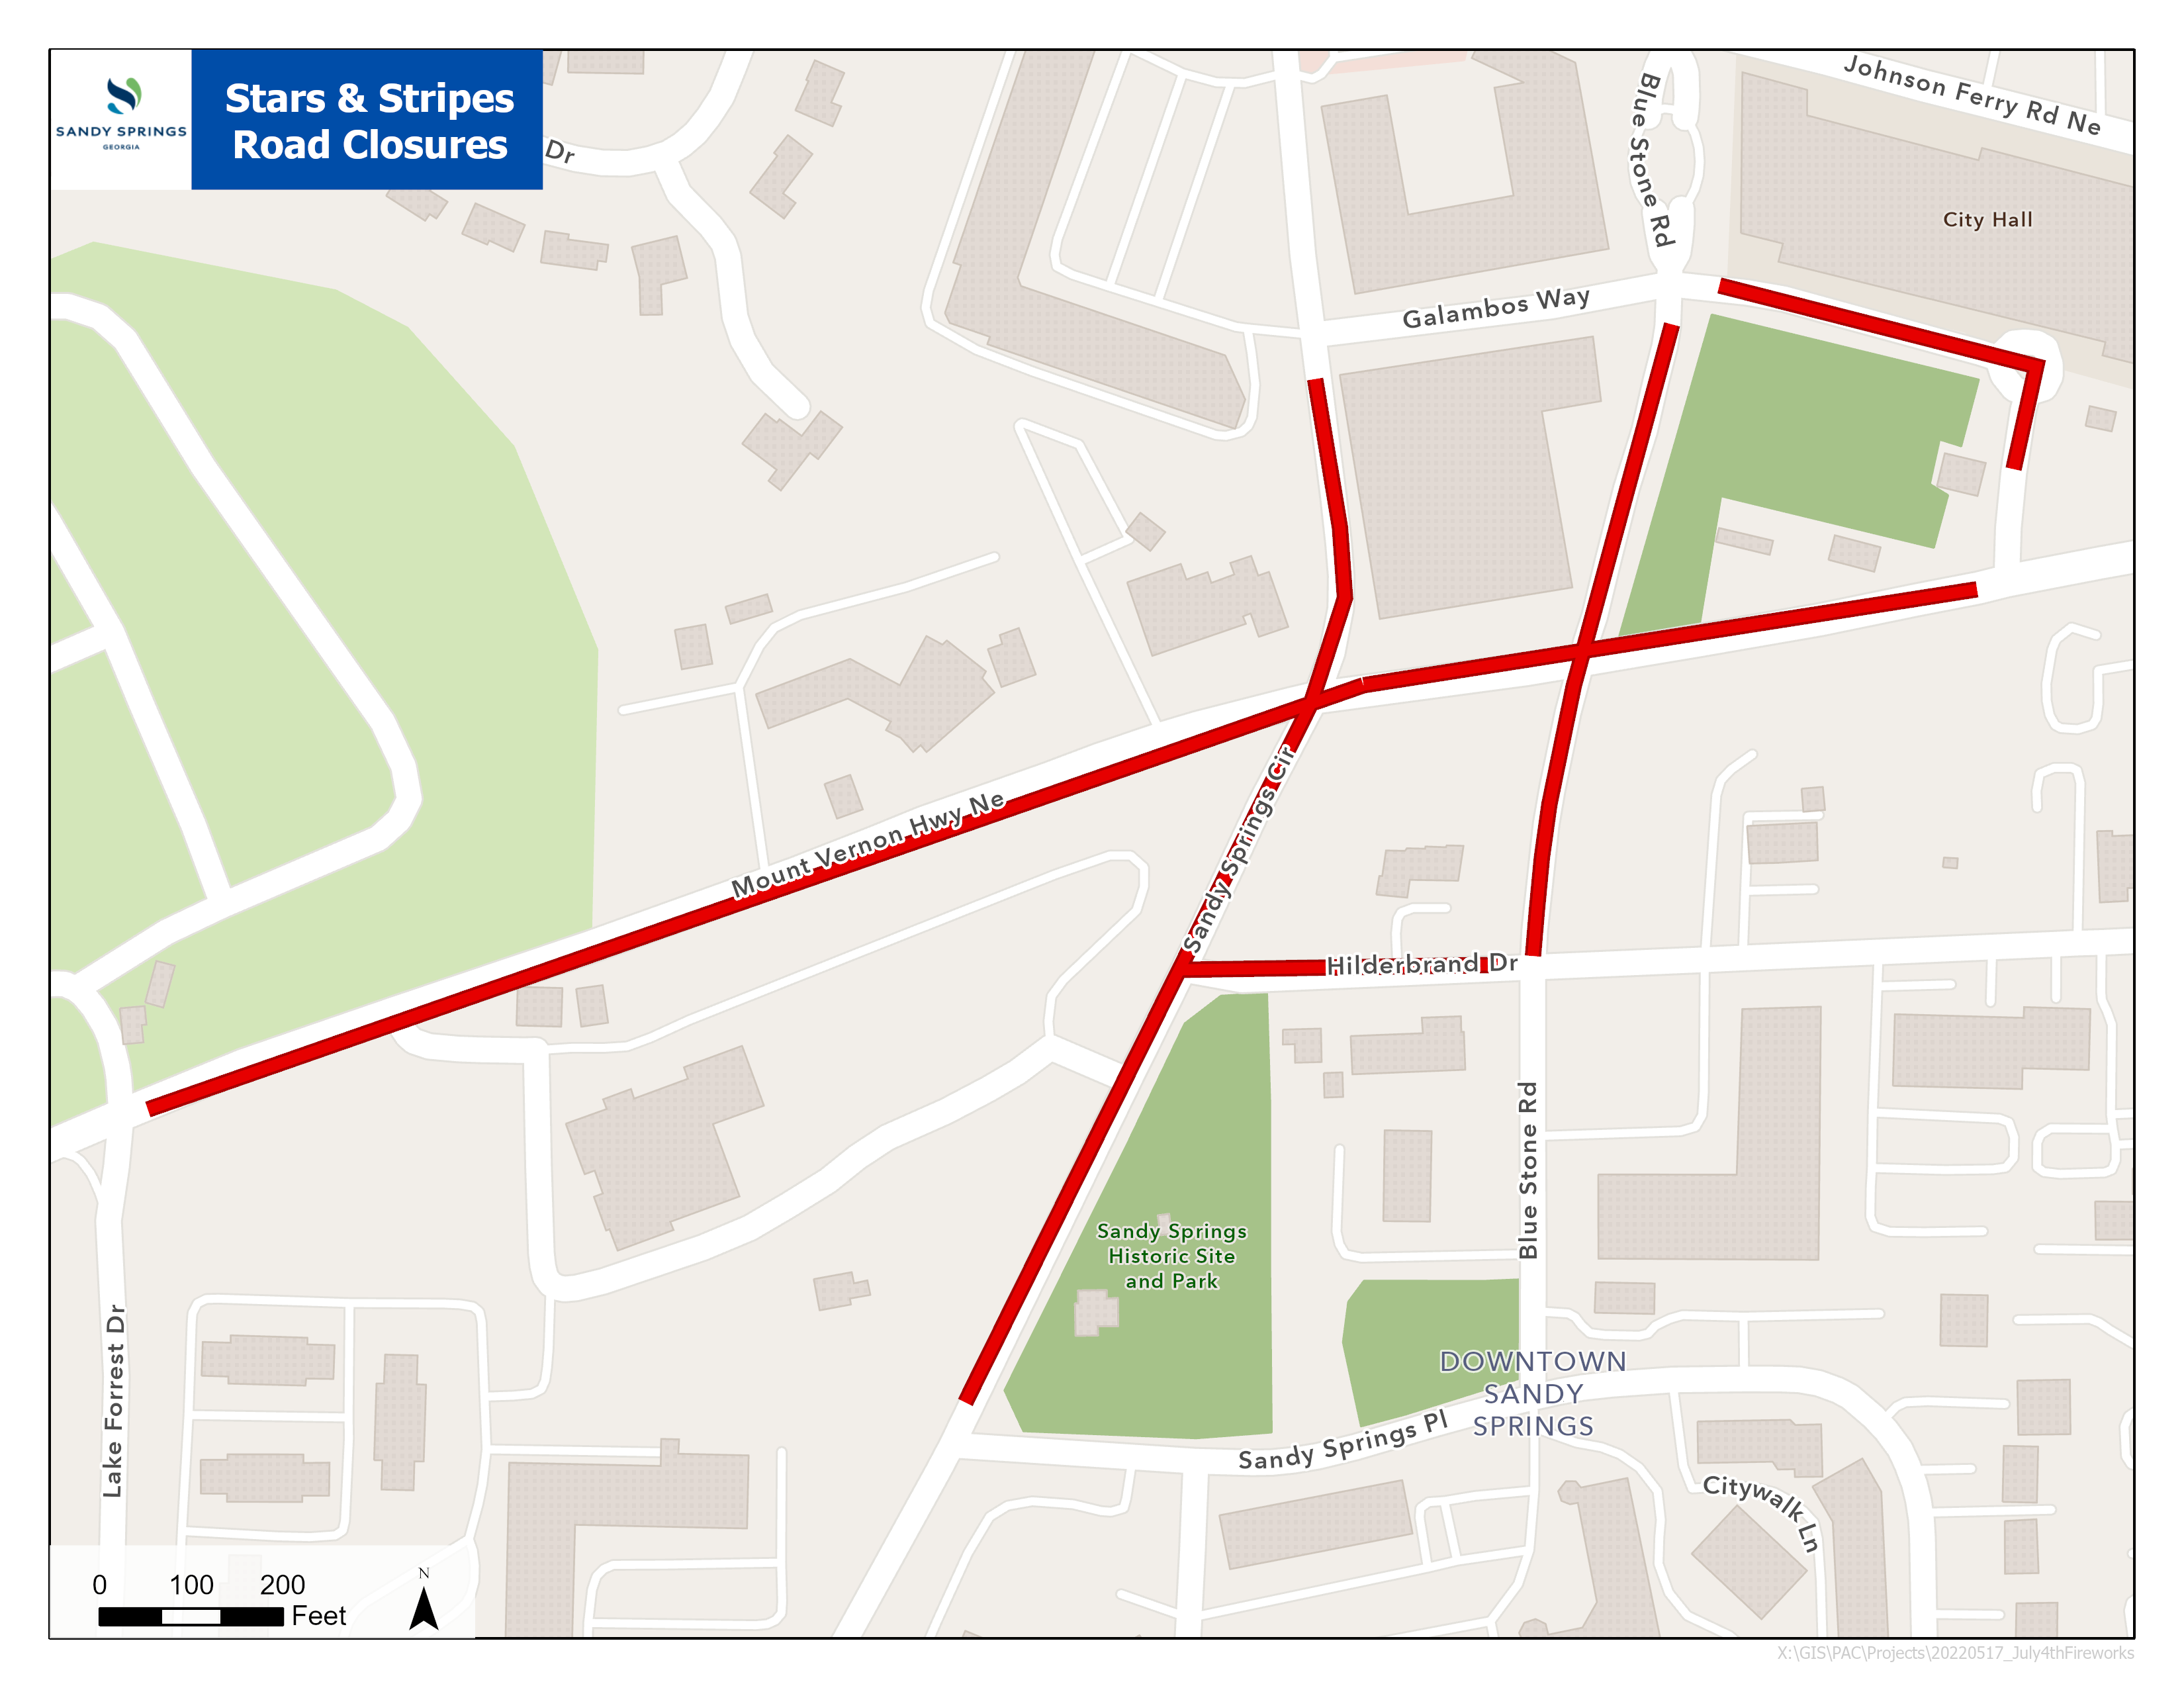 Road Closures for the Stars & Stripes event. All information is included on the webpage text.